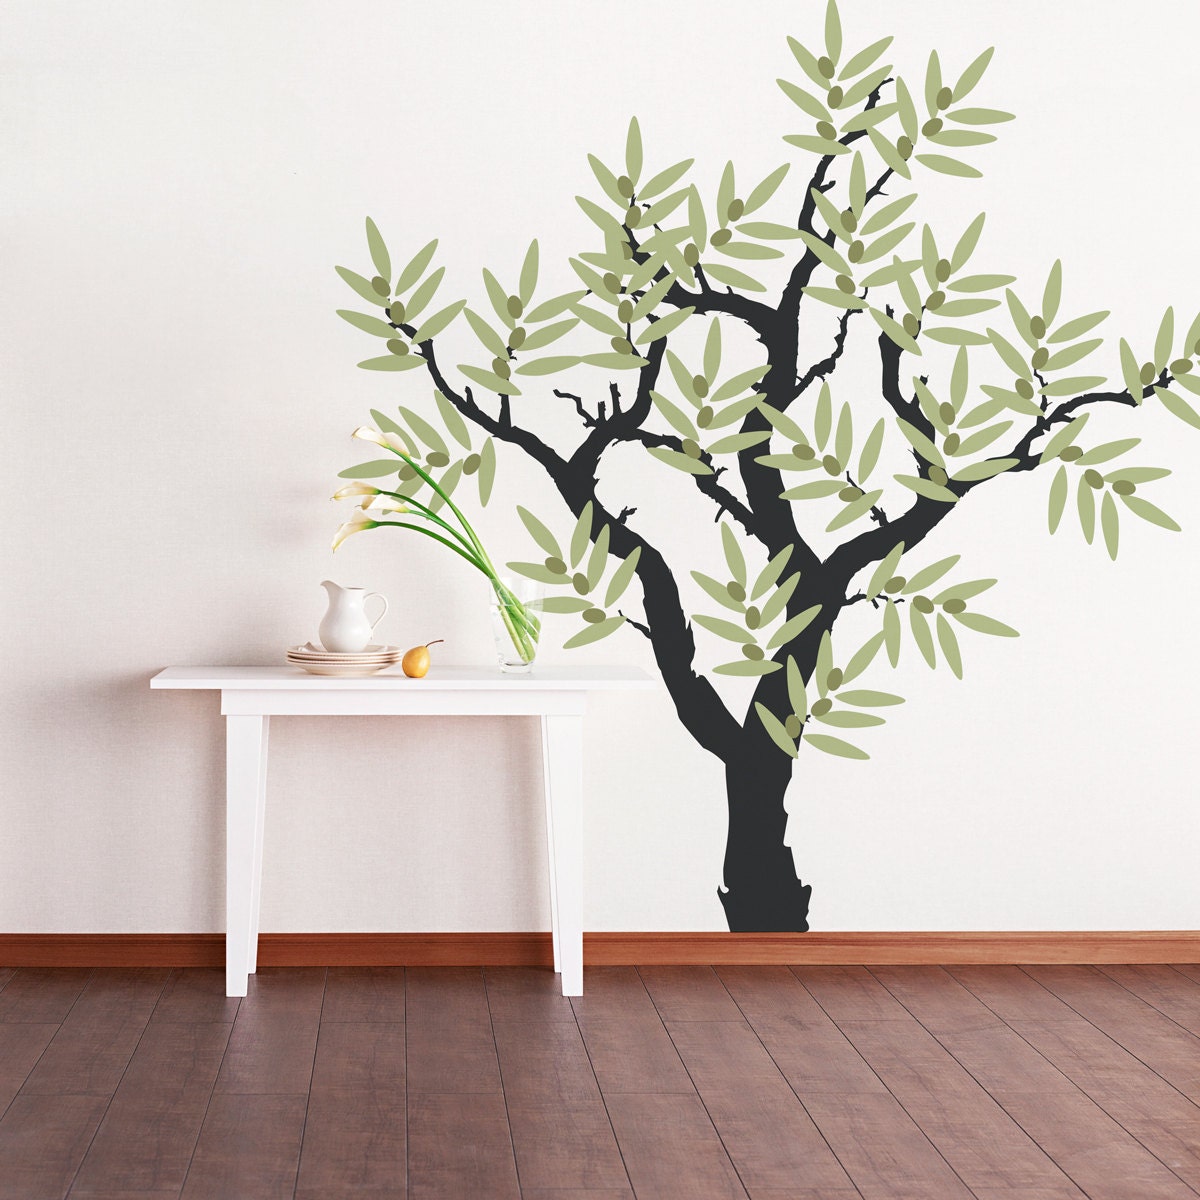 Wall Decor Plus More Tree Wall Art for Family Room or Live Room Decor Wall Sticker Decal Olive Green 